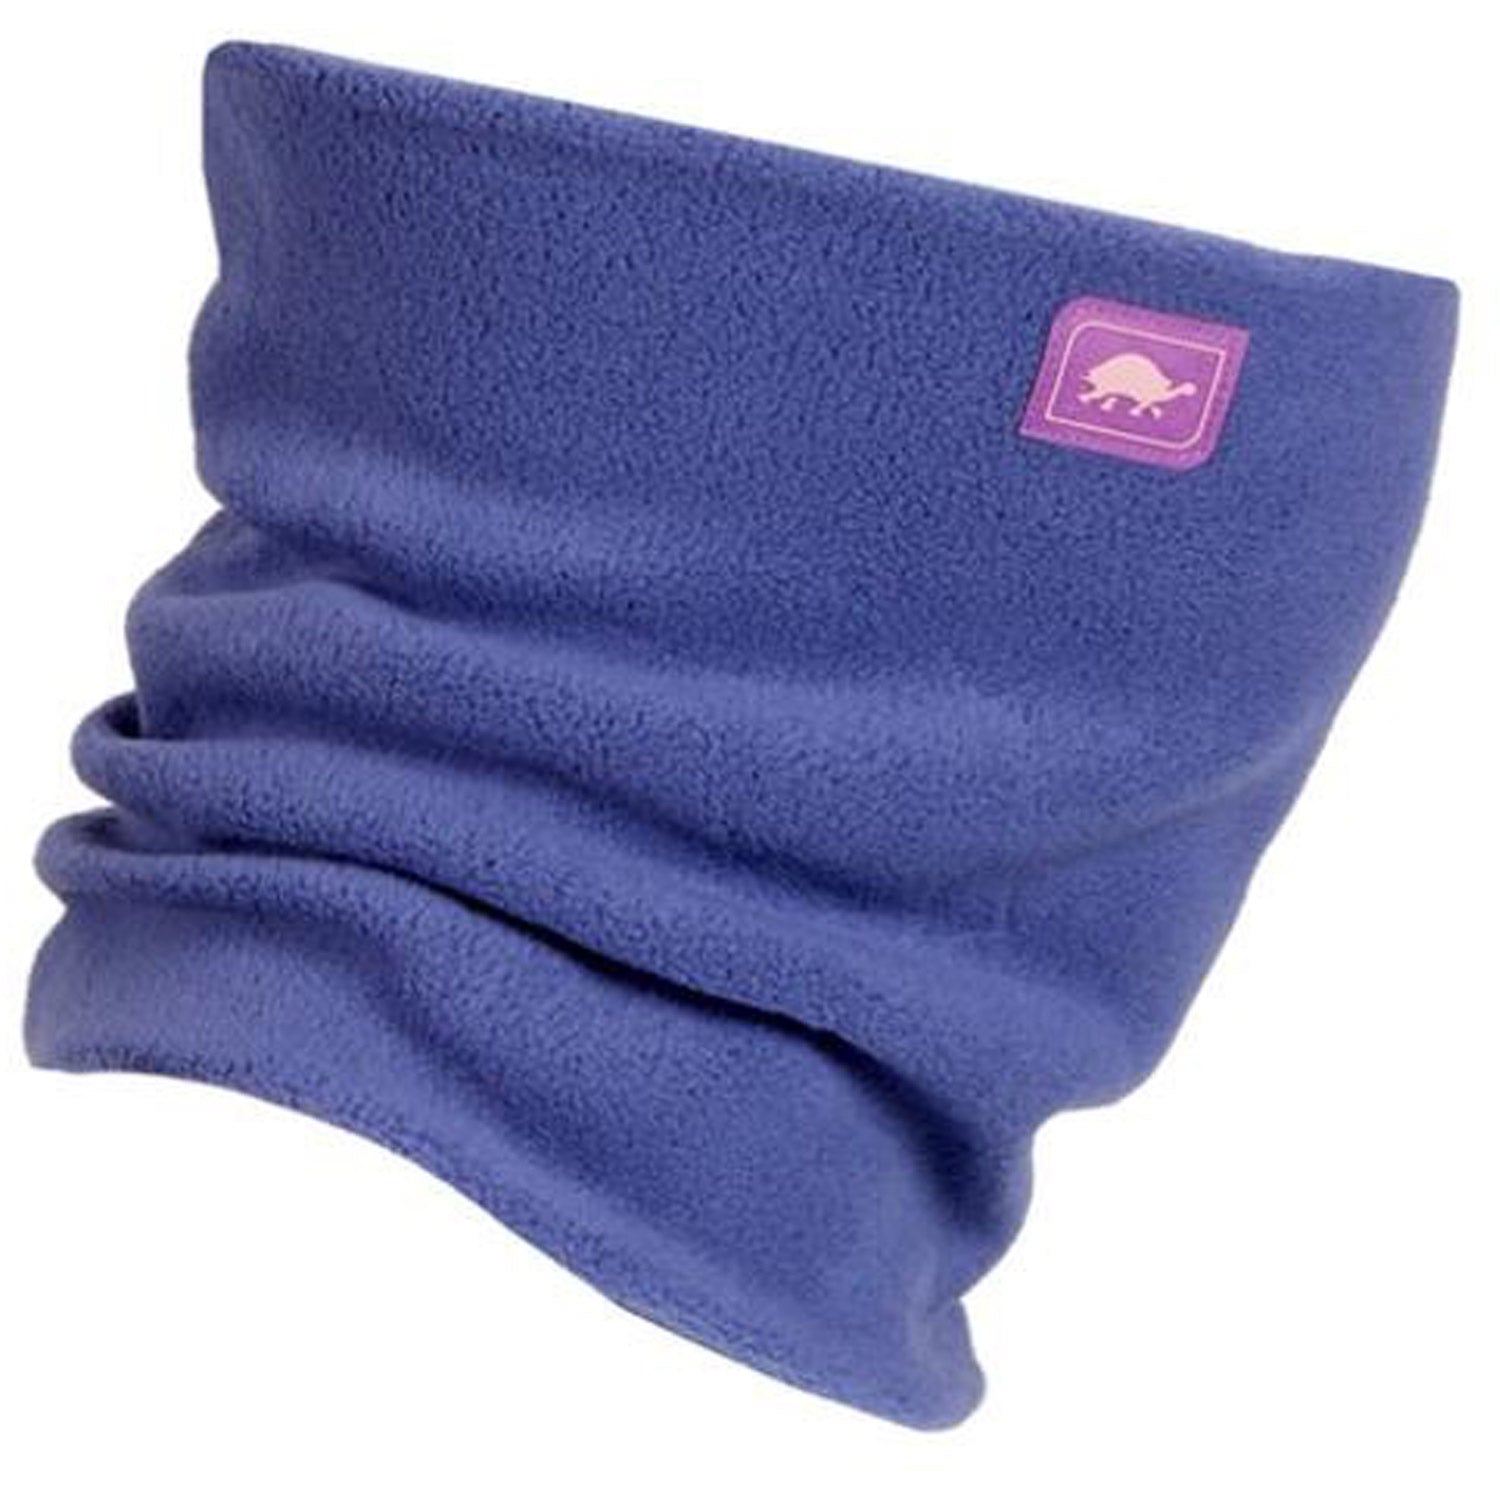 Kids' Double-Layer Neck Warmer